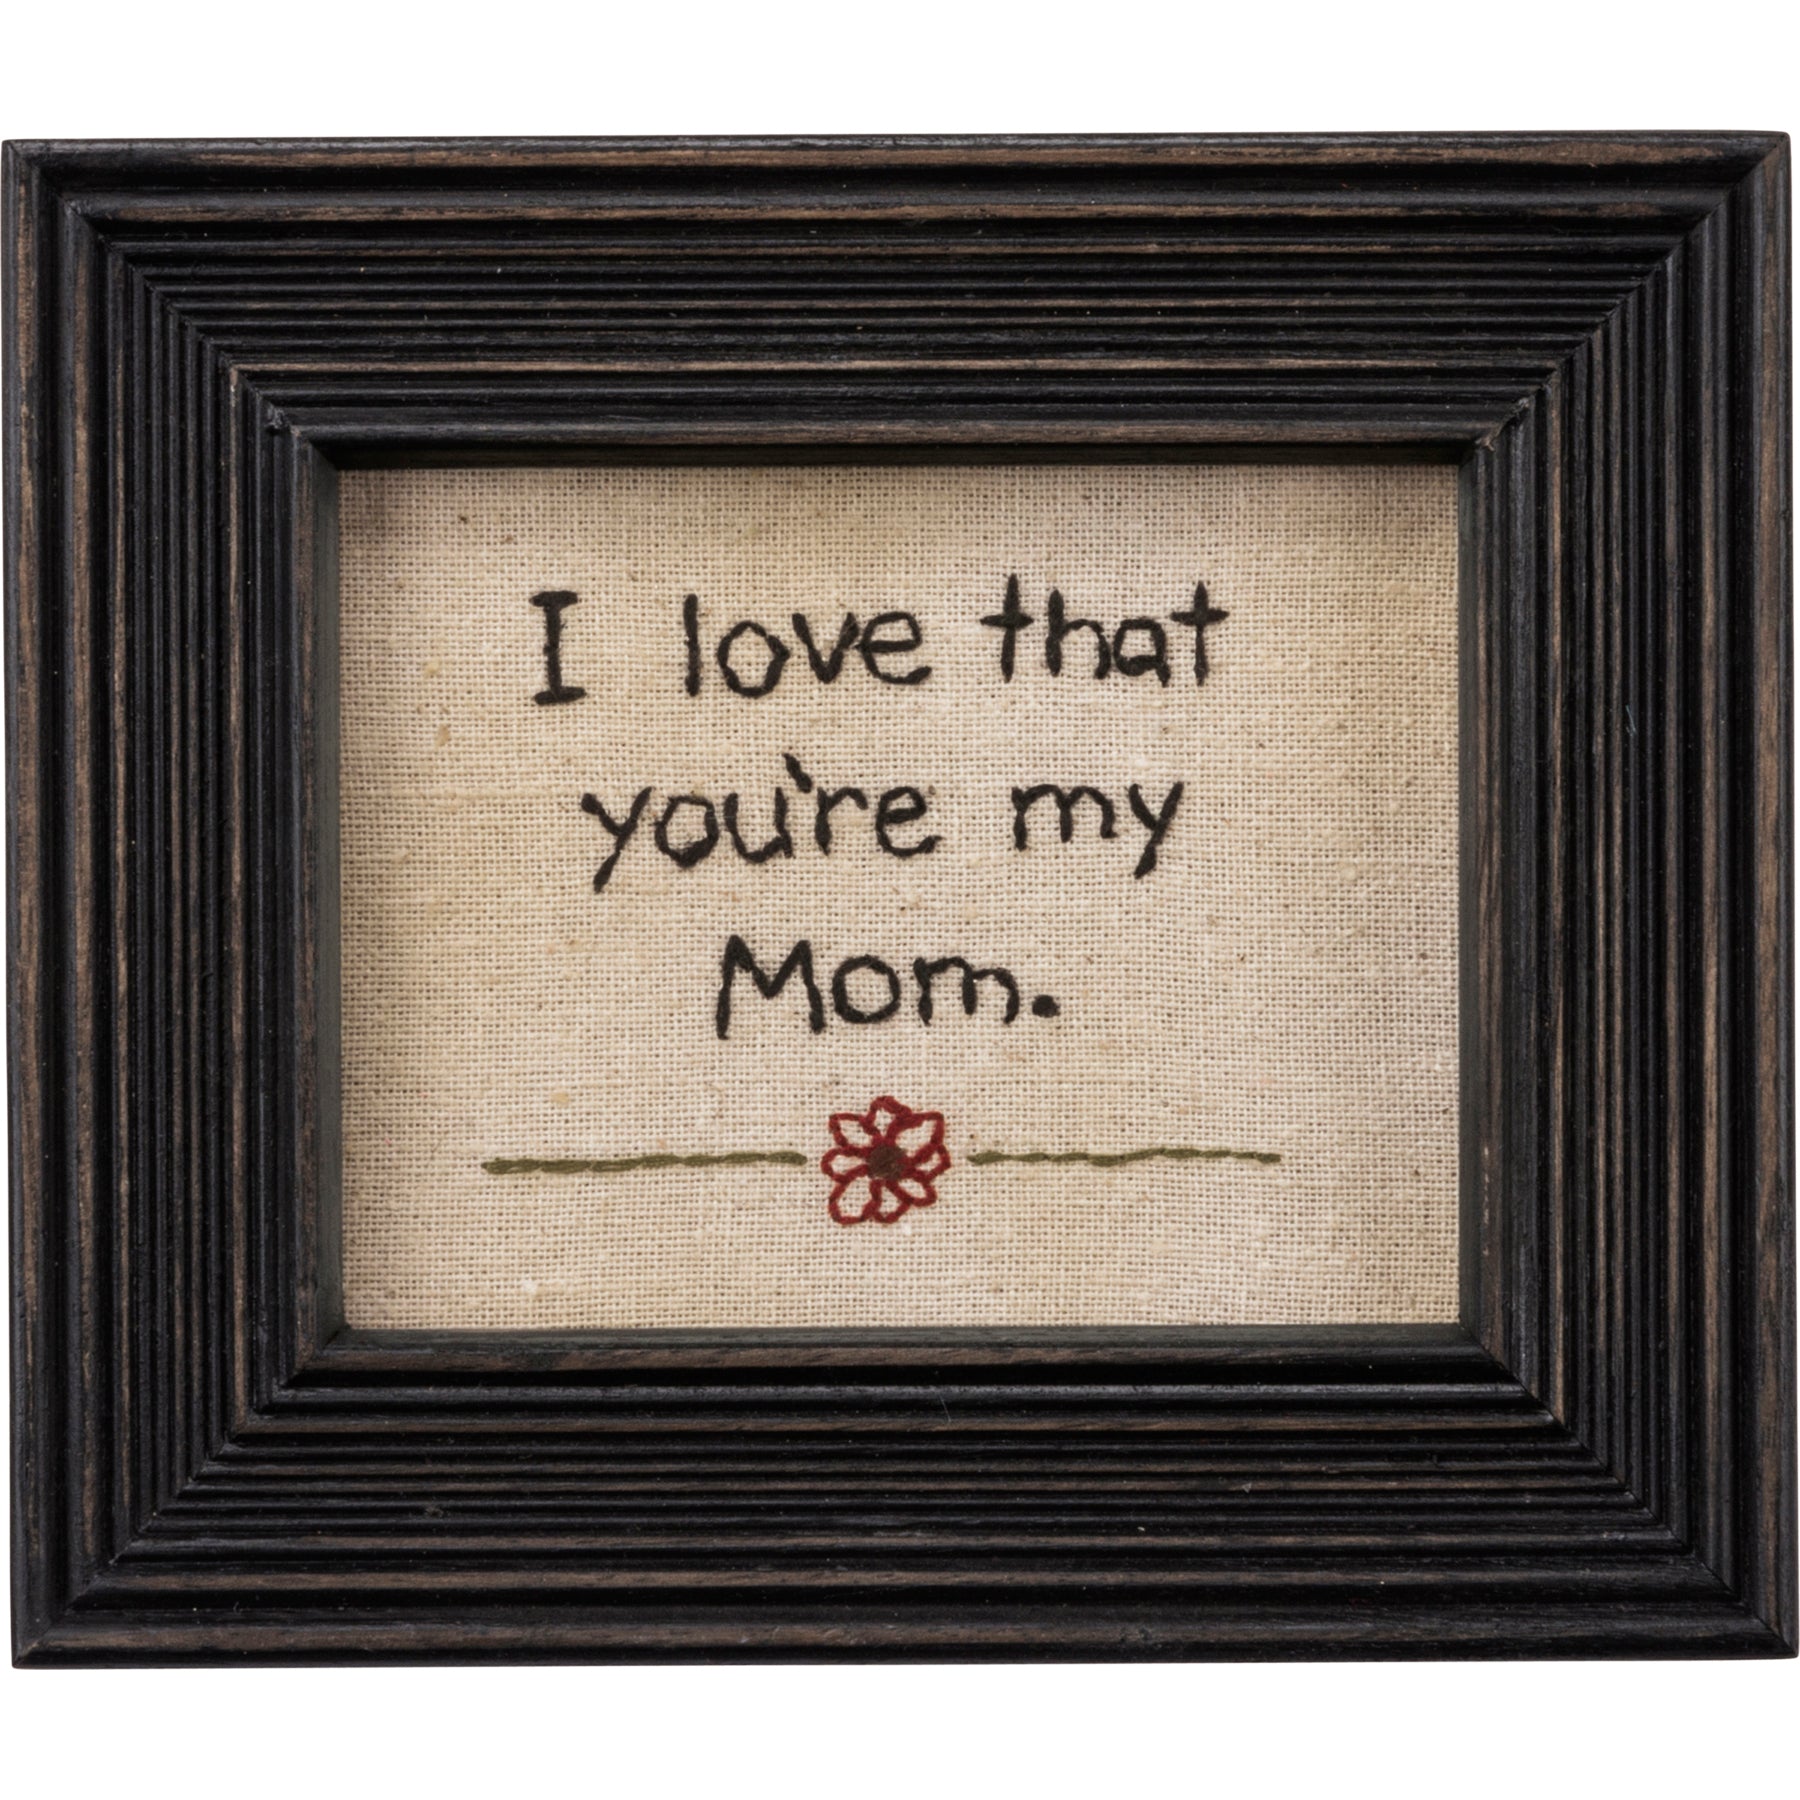 I Love That You're My Mom Stitchery Sign